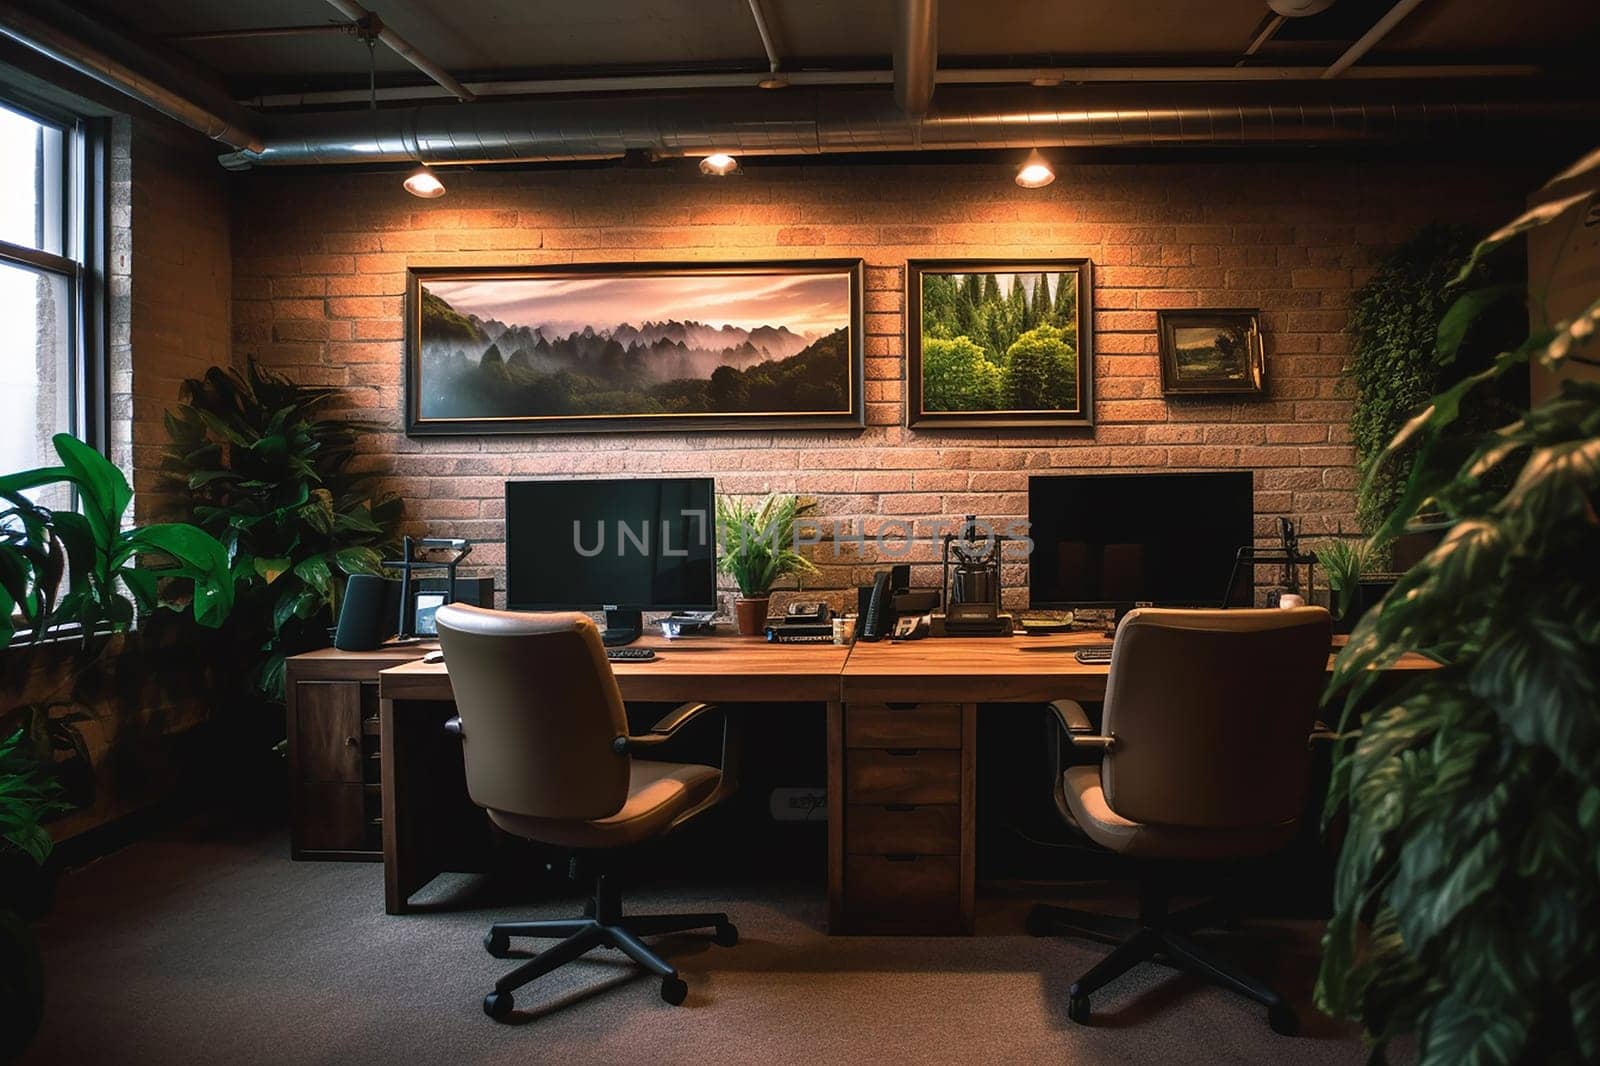 Modern office interior with wooden desks, ergonomic chairs, computers, and framed landscape pictures on a brick wall, surrounded by indoor plants.